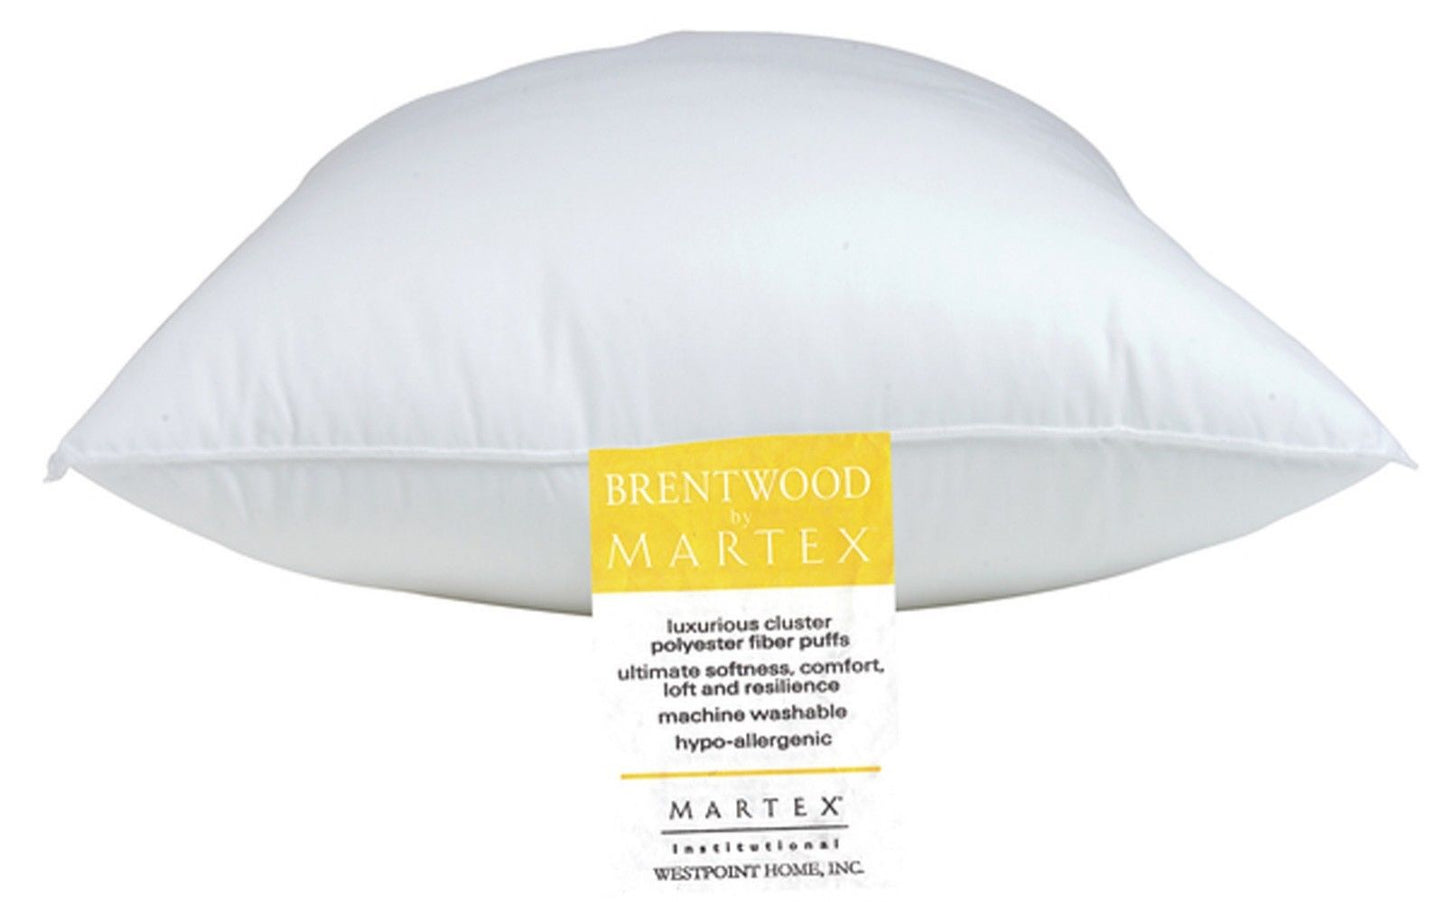 Martex Brentwood Gold Label Jumbo Homewood Suites Hotel Pillow